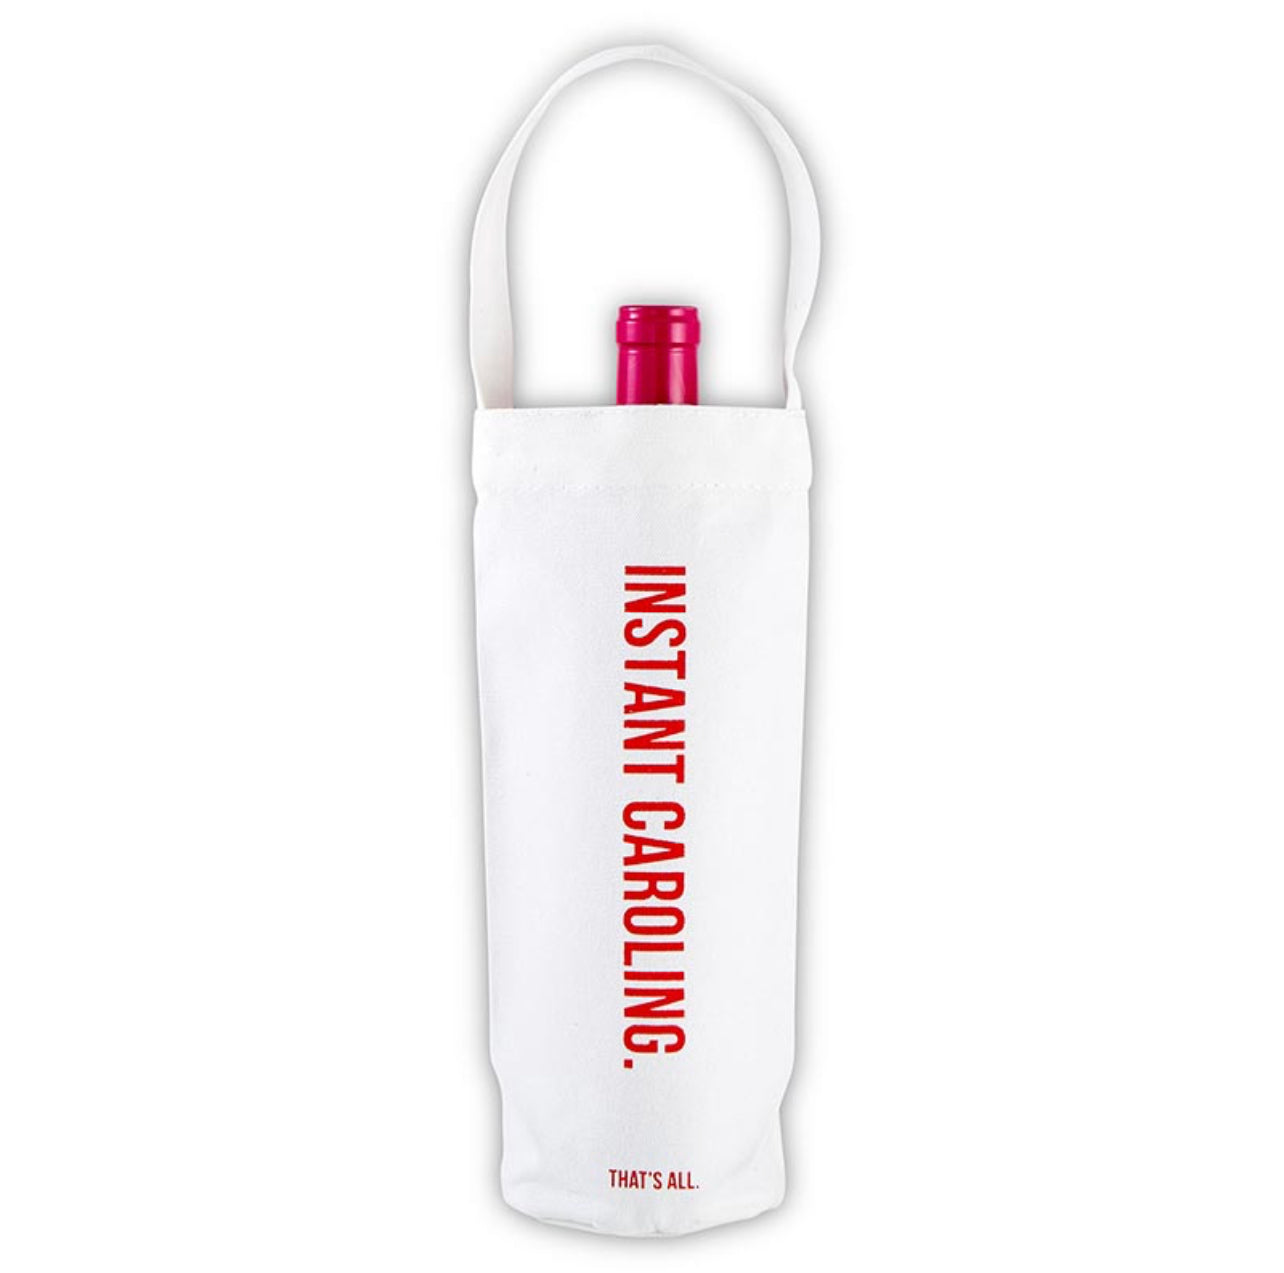 white canvas wine bag for christmas that features red script saying "instant caroling"